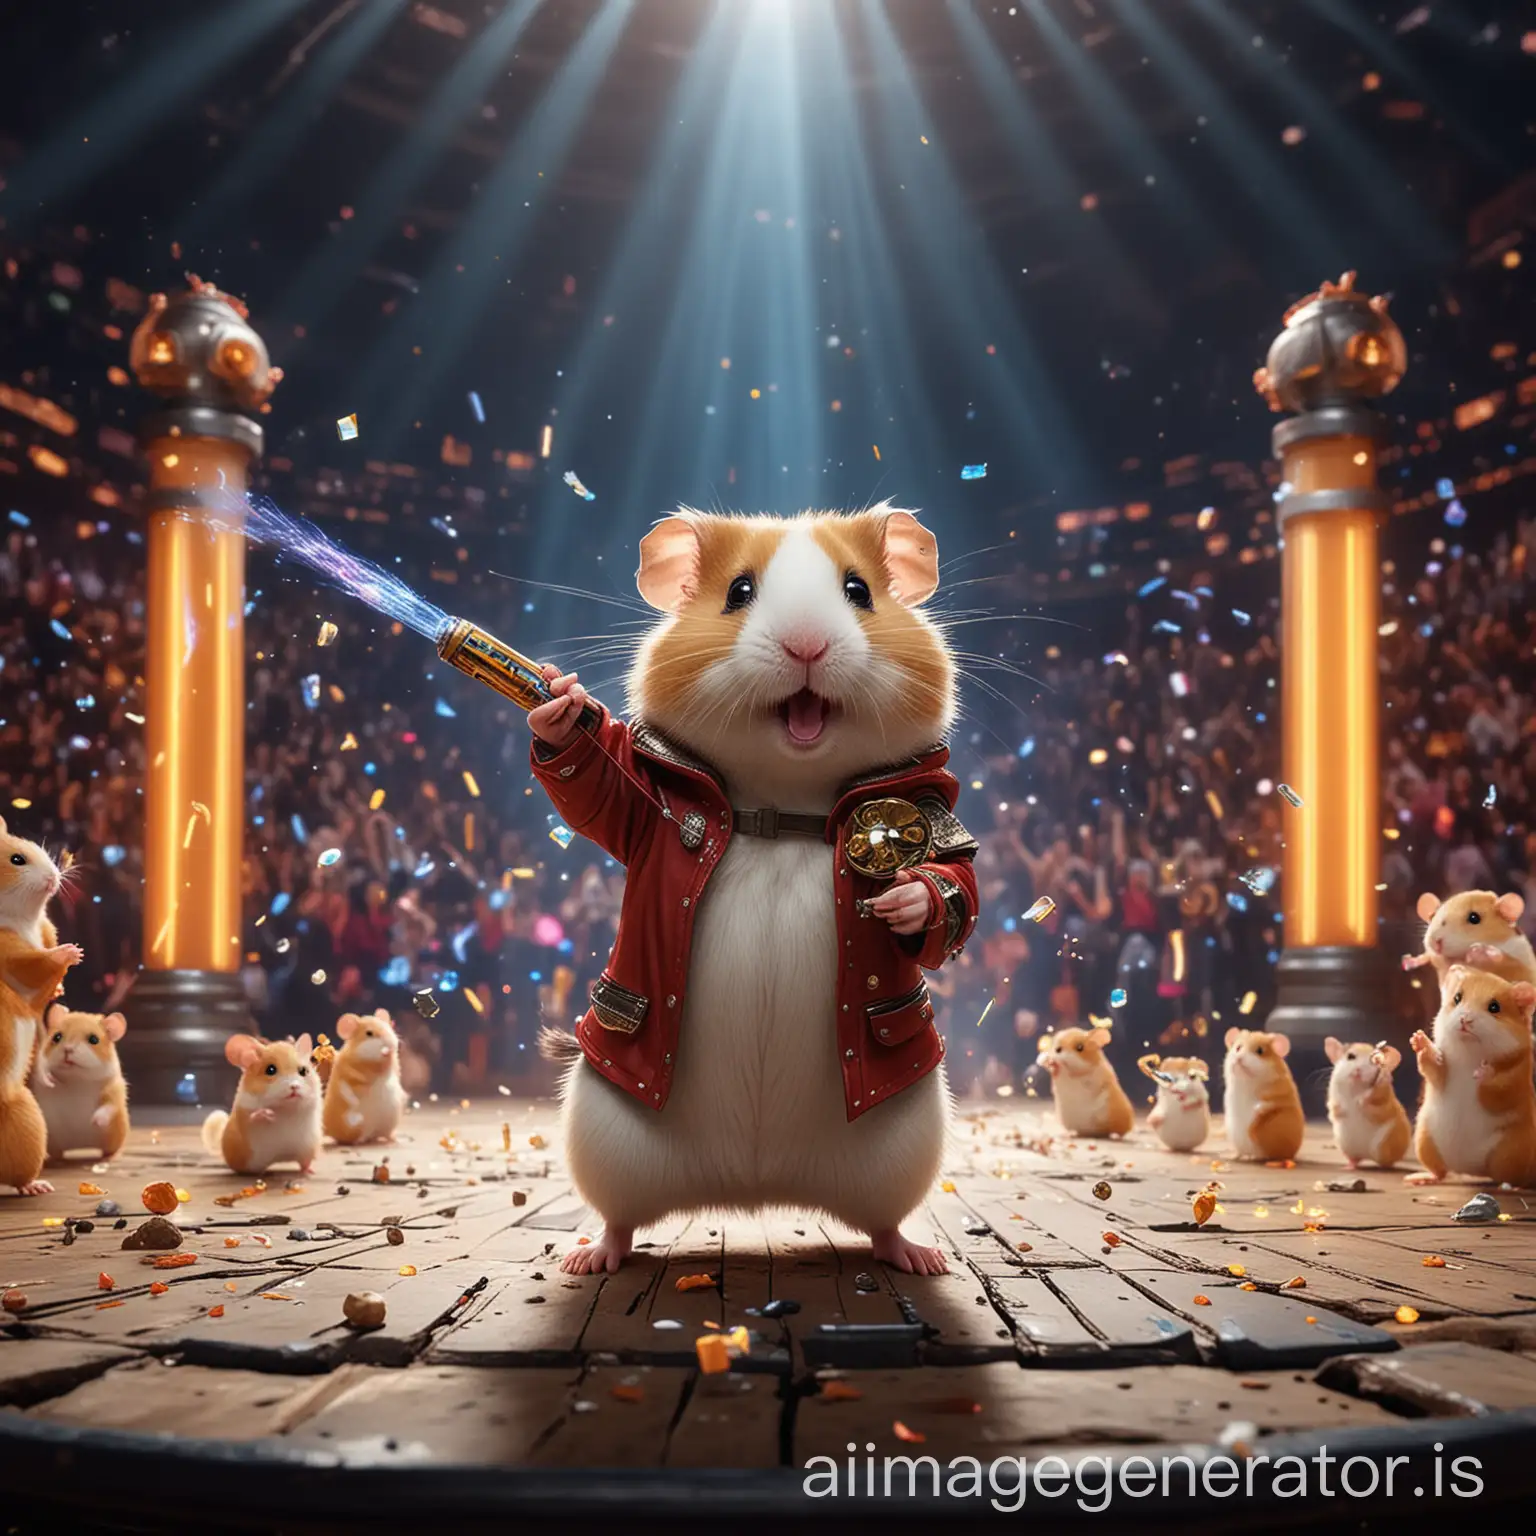 An extravagant stage design: A grand and magnificent arena with a futuristic, digital background. In the center of the stage stands an energetic and charismatic hamster artist. The hamster is dressed in shiny armor, holding a microphone in one paw and raising the other triumphantly. Bright spotlights illuminate the hamster, while the background features holographic charts and symbols representing the cryptocurrency world. The crowd is filled with enthusiastic hamsters, cheering and waving glow sticks. The atmosphere is electrifying, capturing the excitement of "Hamster Kombat."